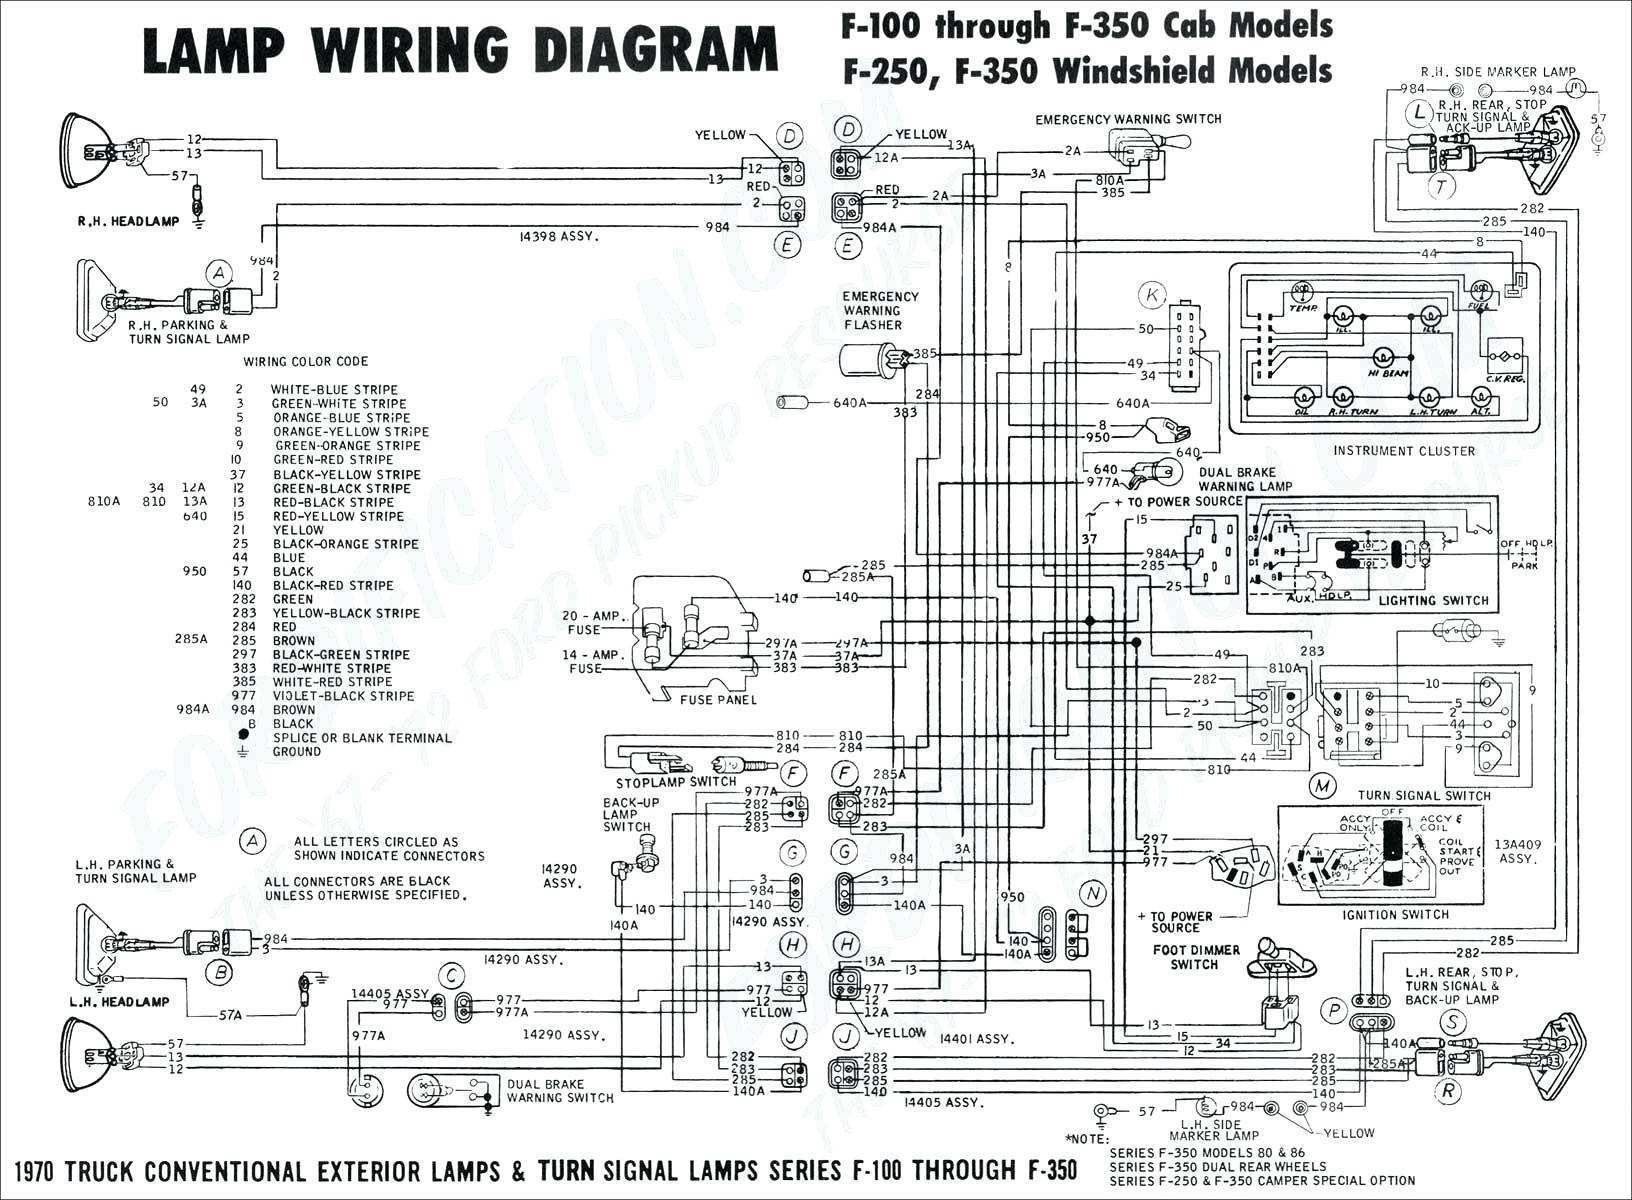 Wiring Diagram for A Car Stereo Bcn Wire Diagram Wiring Diagram 500 Of Wiring Diagram for A Car Stereo